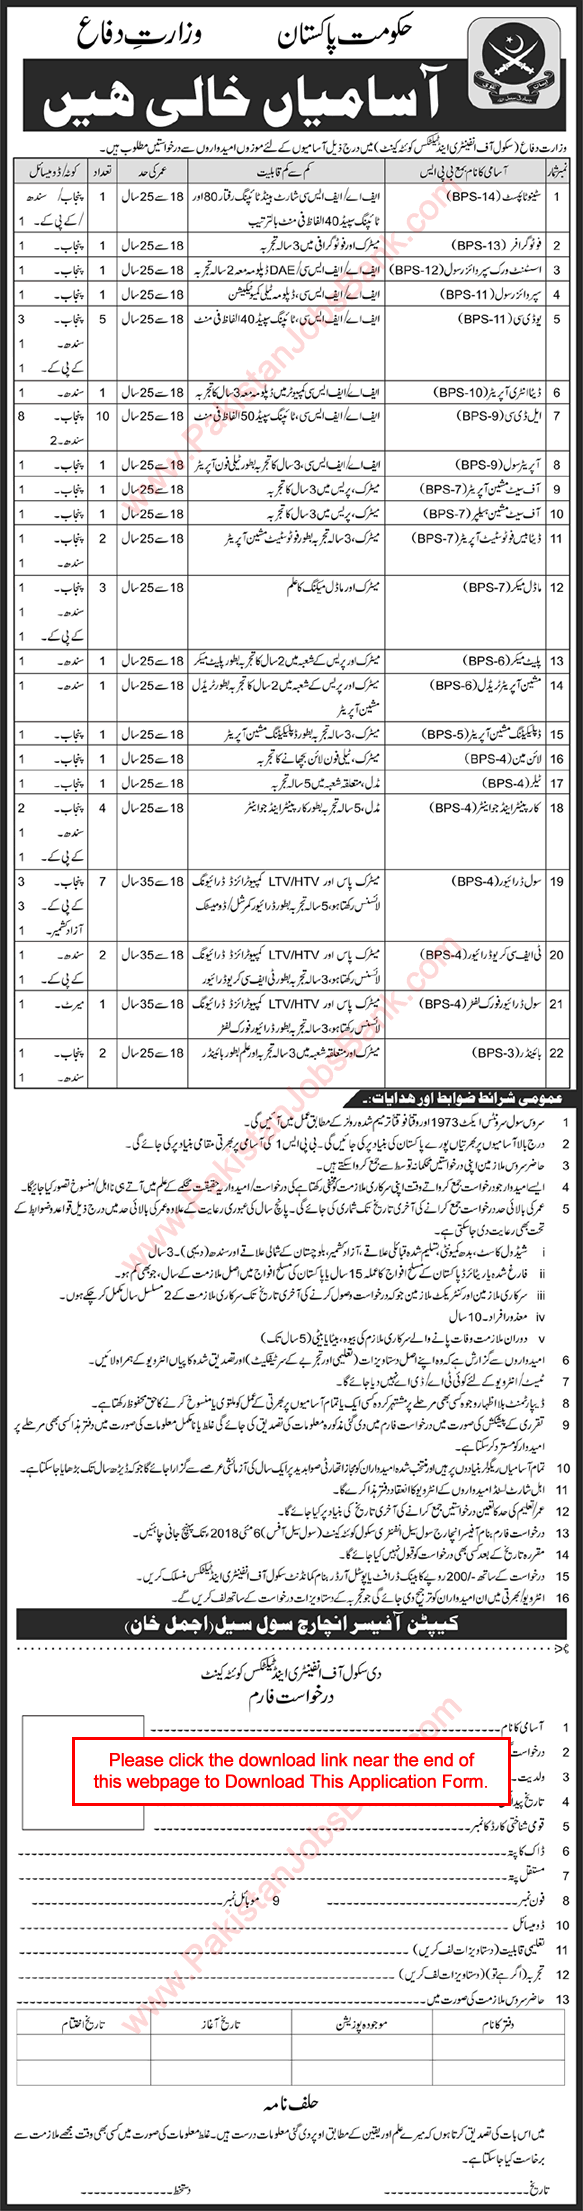 School of Infantry and Tactics Quetta Jobs 2018 April Application Form Ministry of Defence Latest